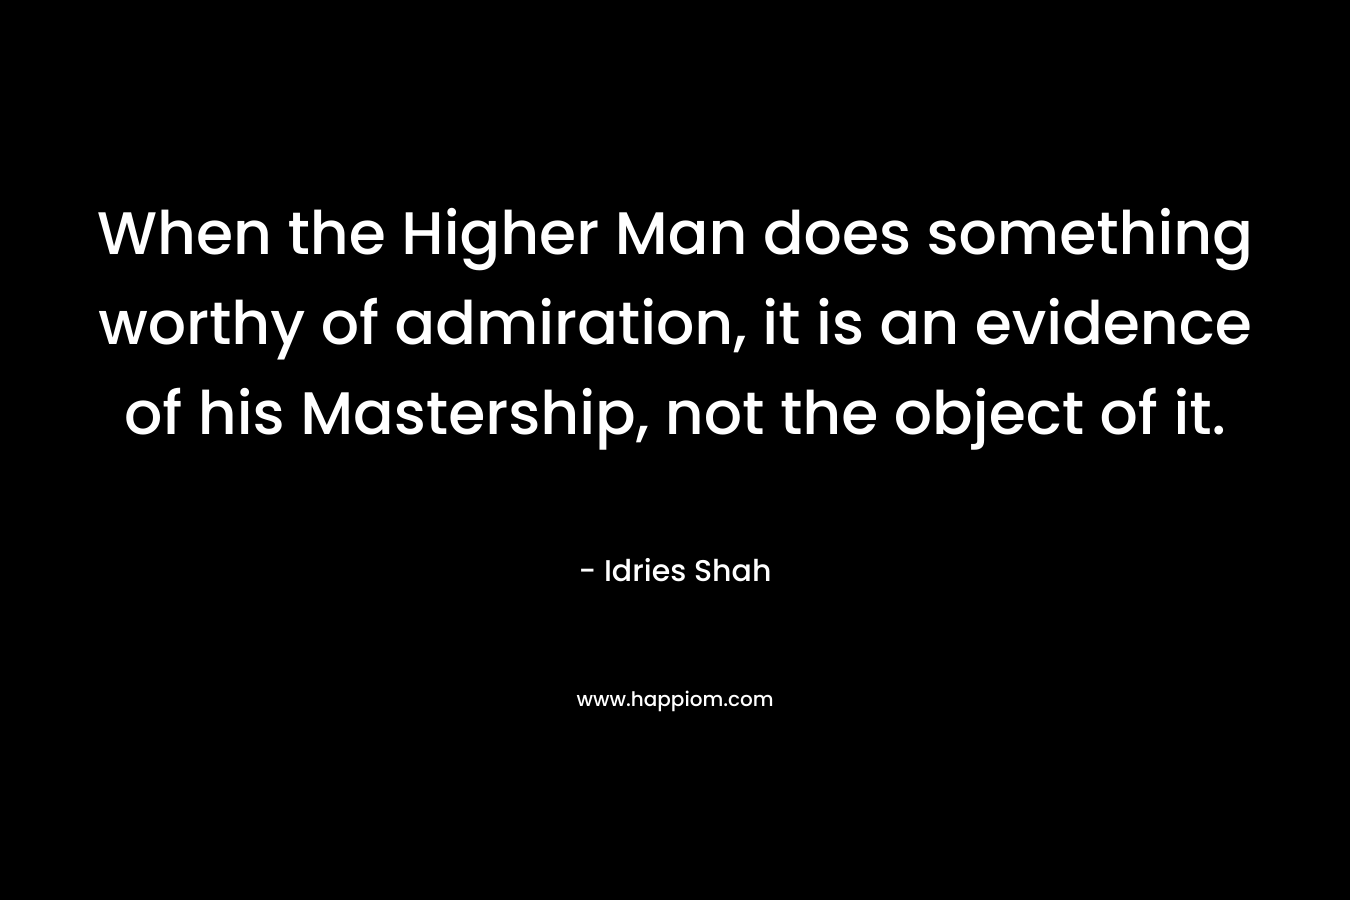 When the Higher Man does something worthy of admiration, it is an evidence of his Mastership, not the object of it. – Idries Shah